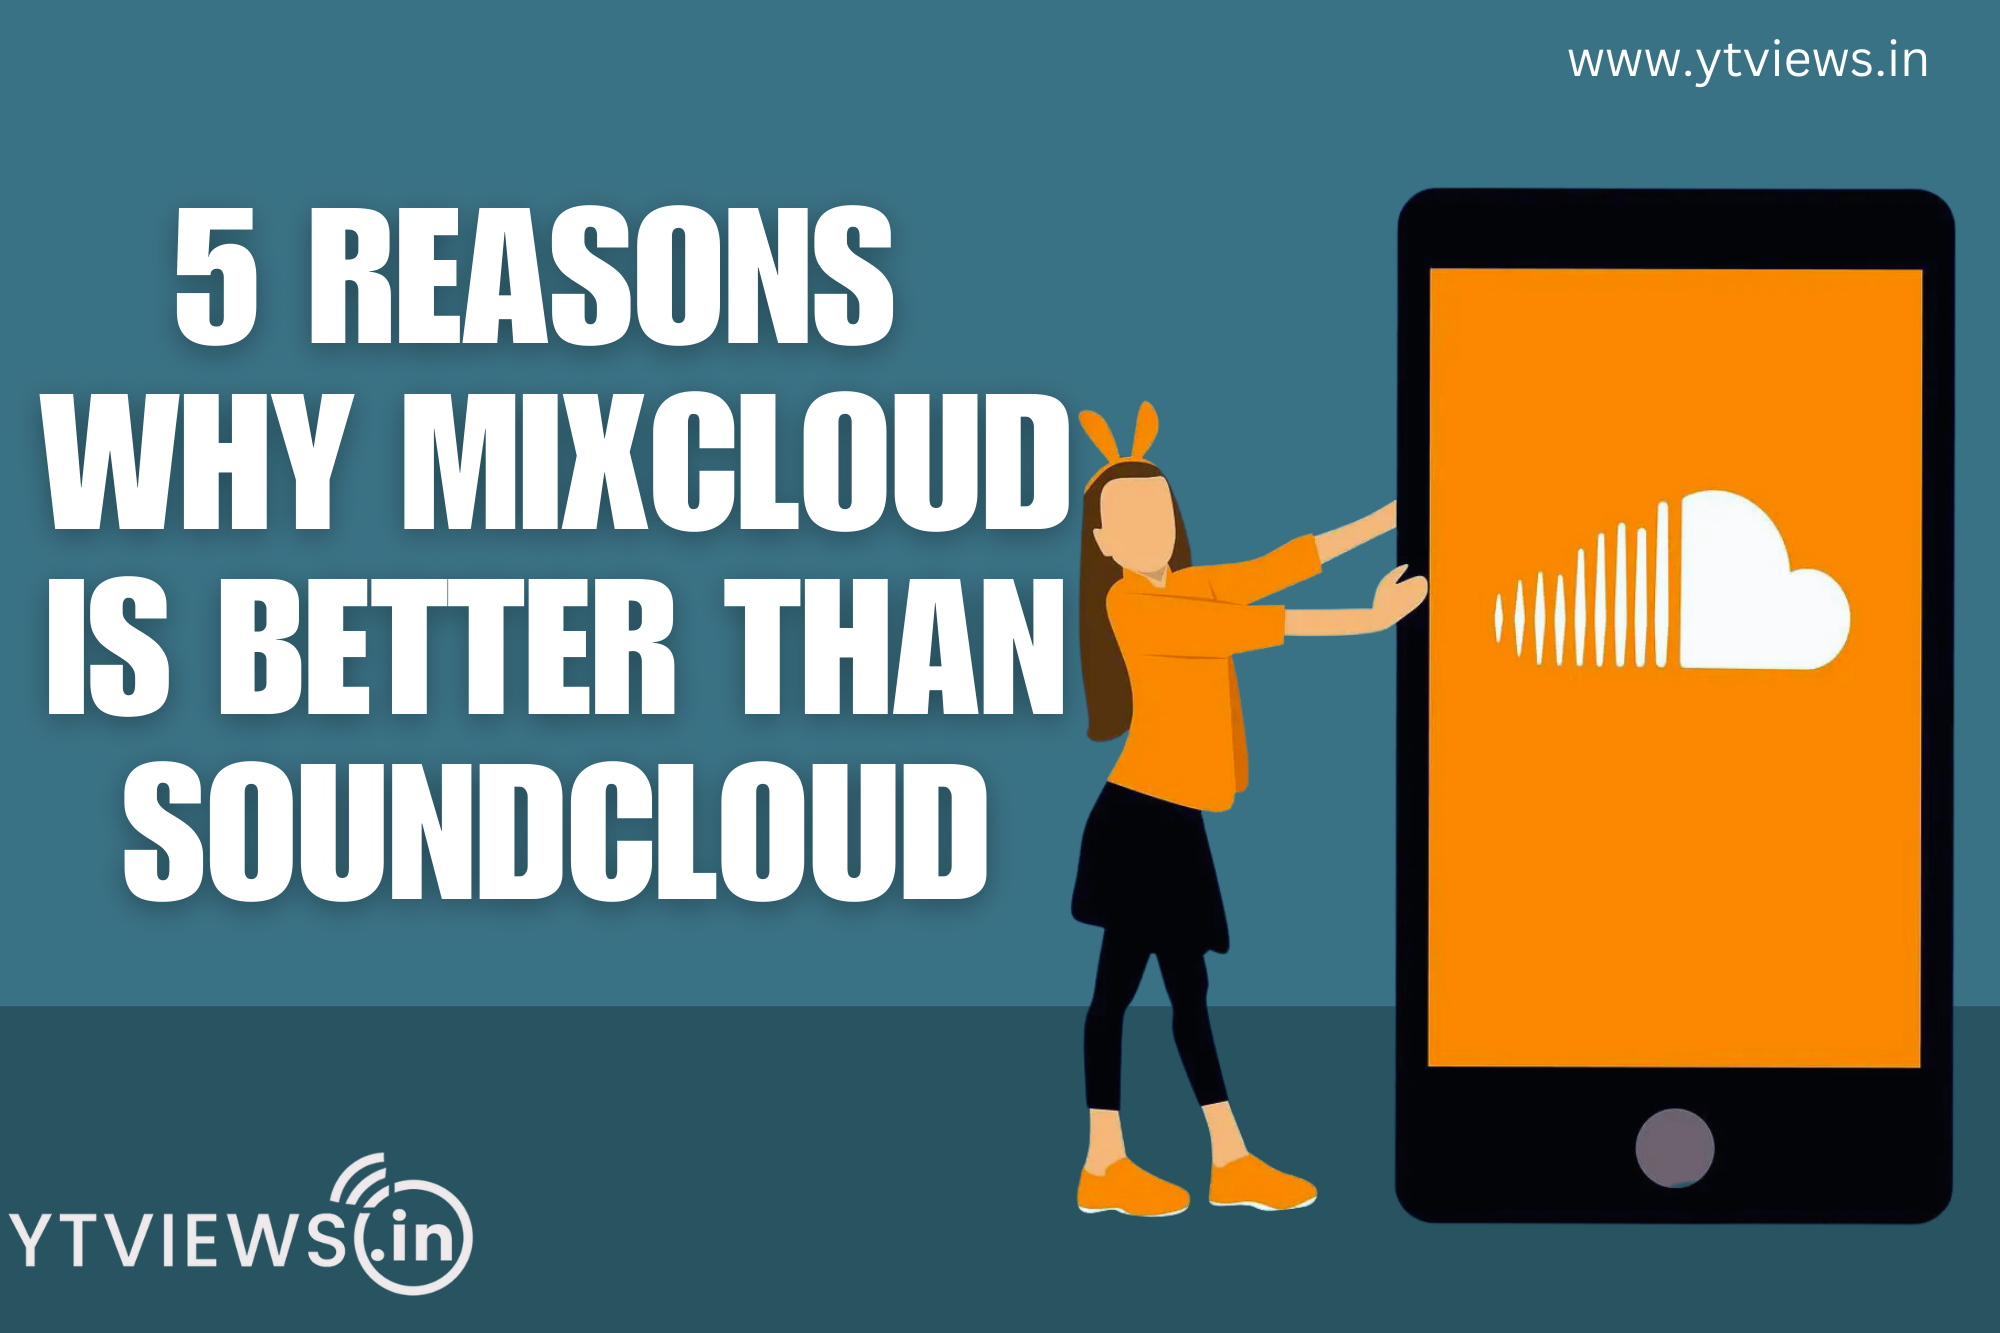 5 reasons why Mixcloud is better than Soundcloud